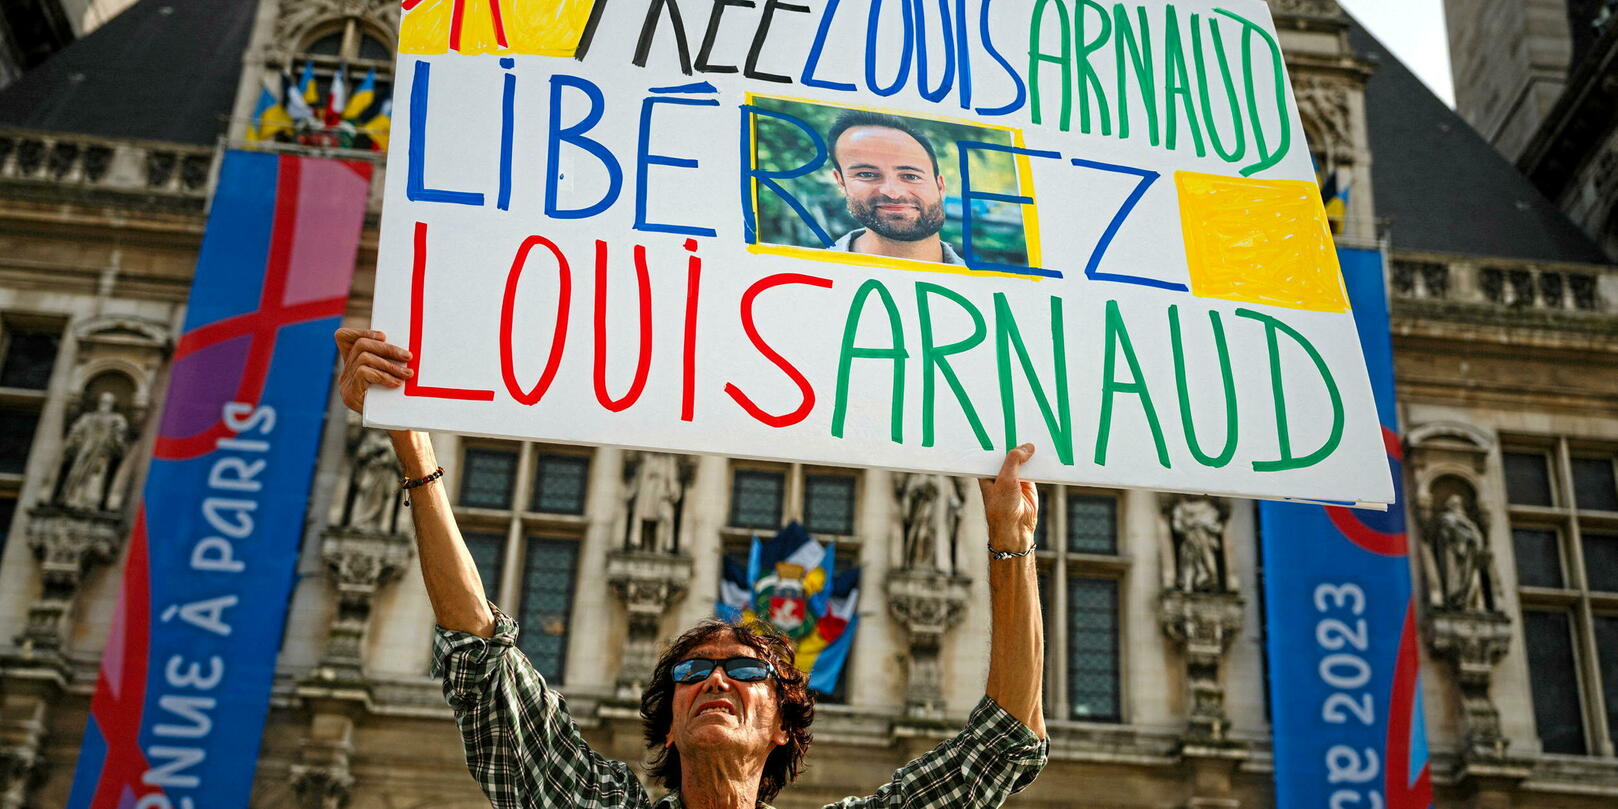 rally to demand the release of a Frenchman